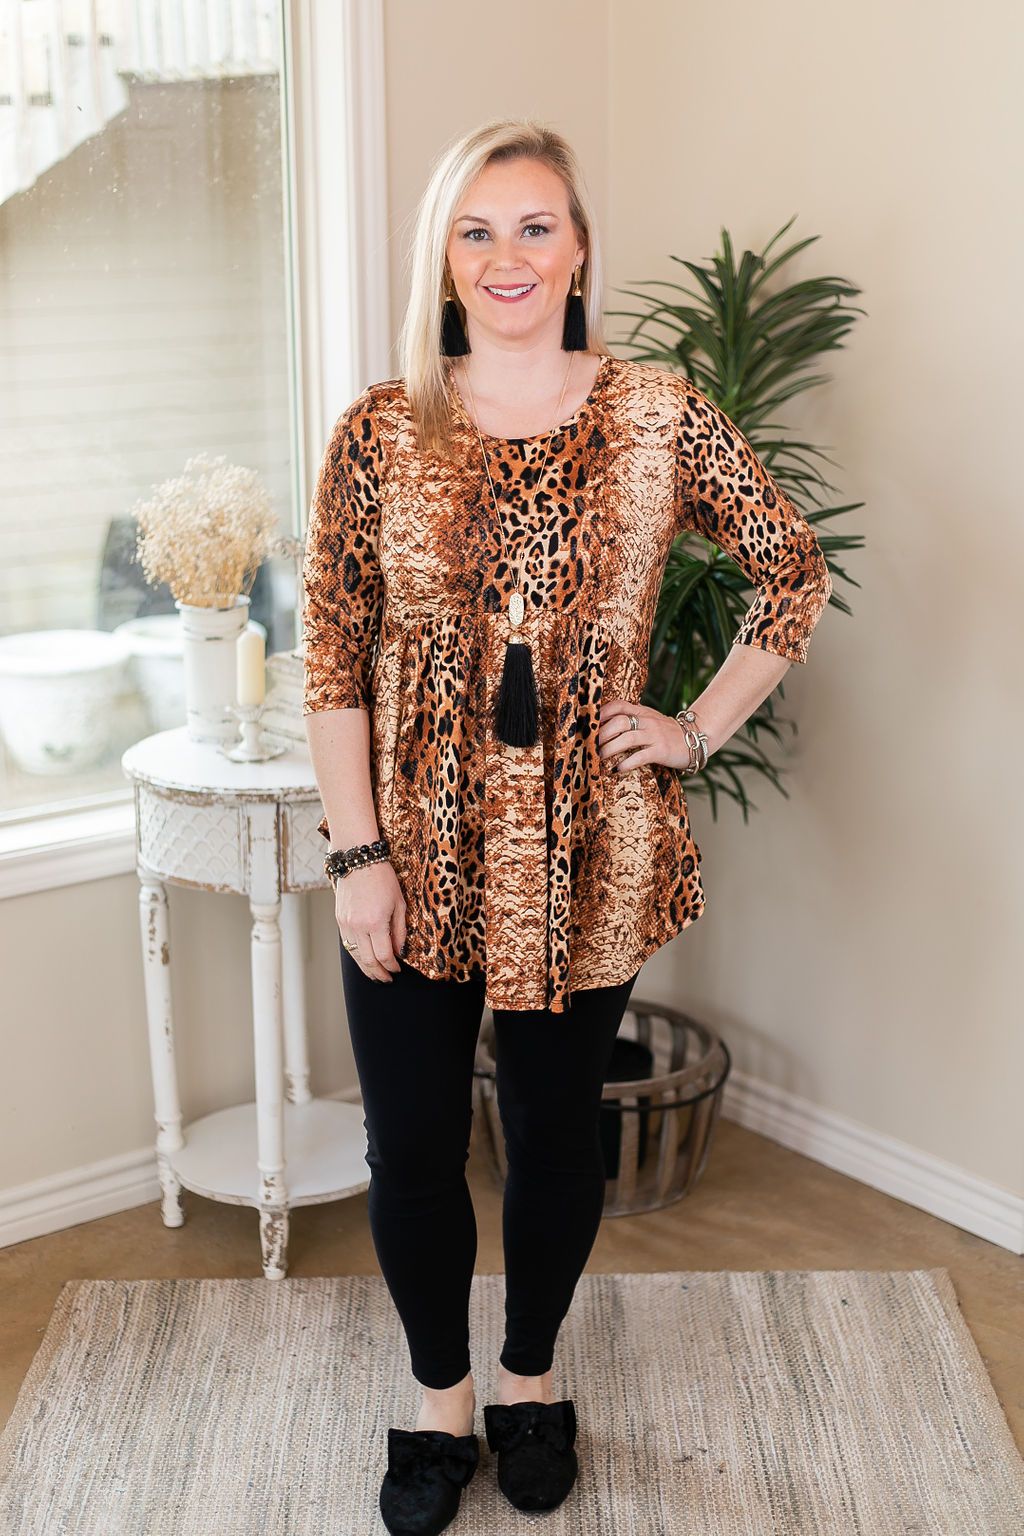 As You Wish Animal Print Baby Doll Top in Rust Red tan black leopard print and cheetah with snakeskin comfy shirt